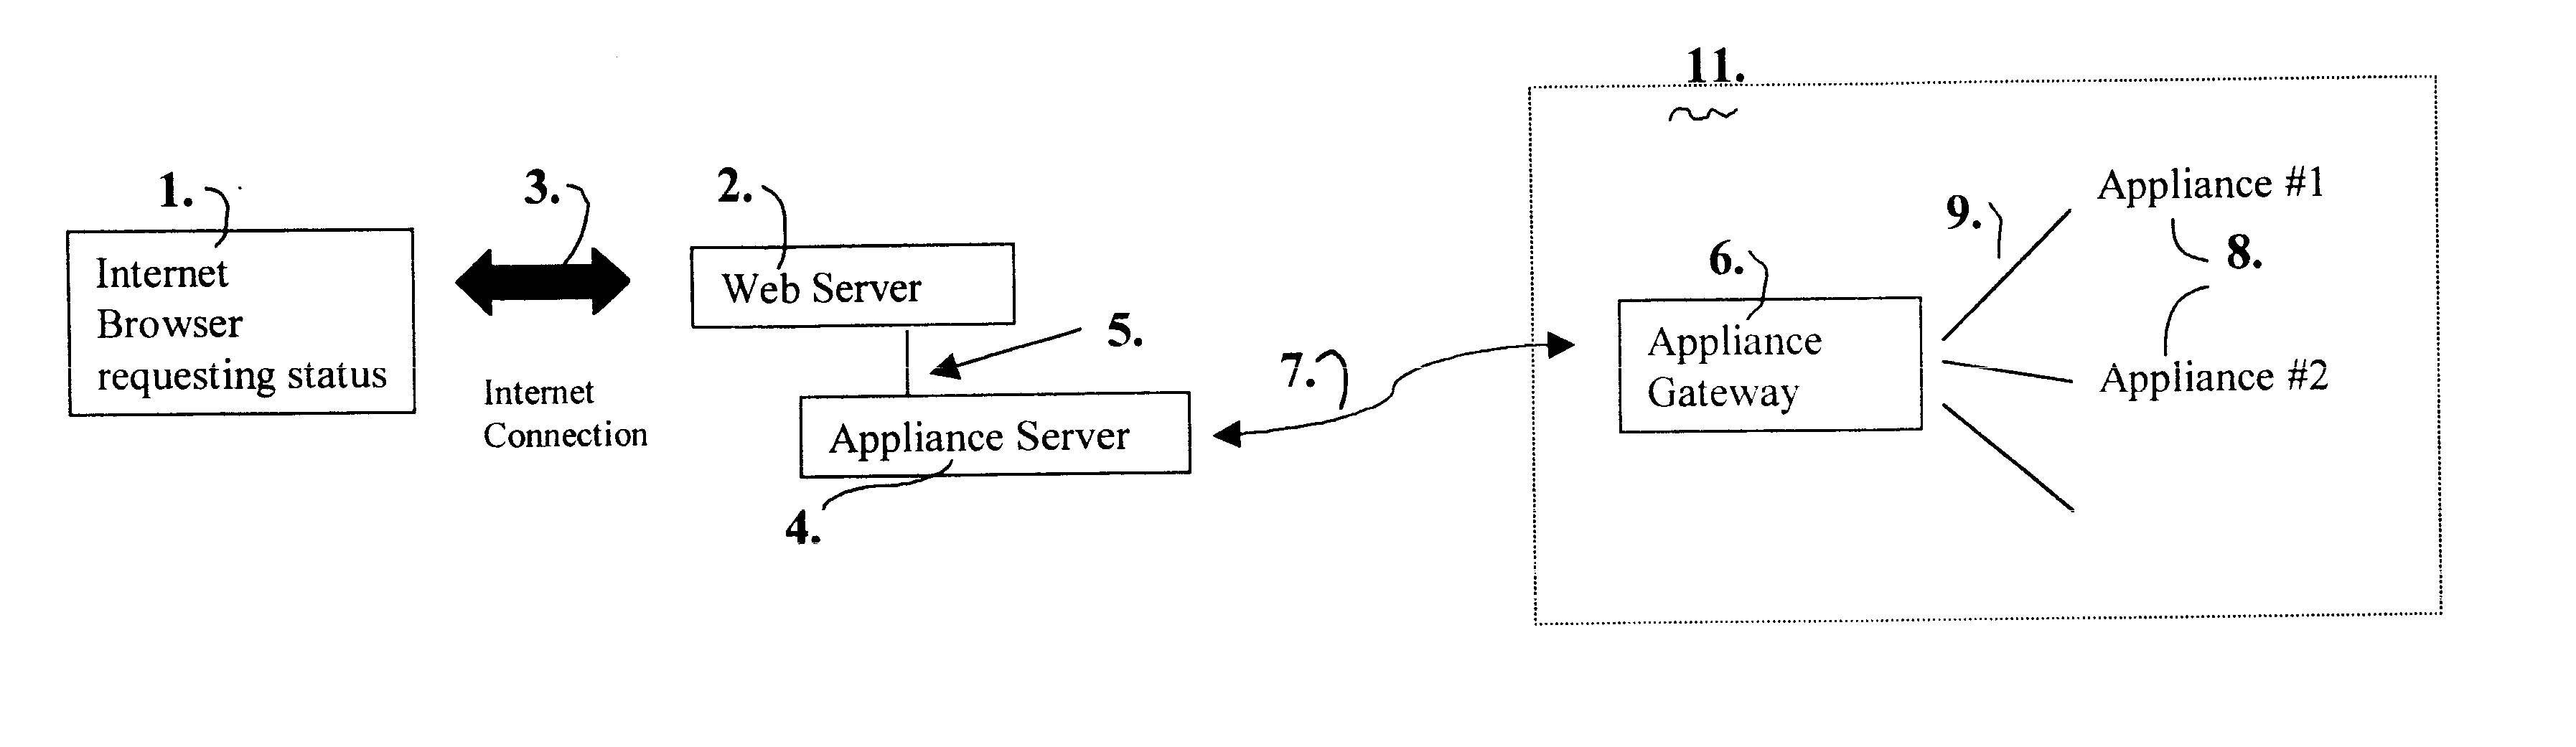 Remote initiation of communications for control of multiple appliances by telephone line